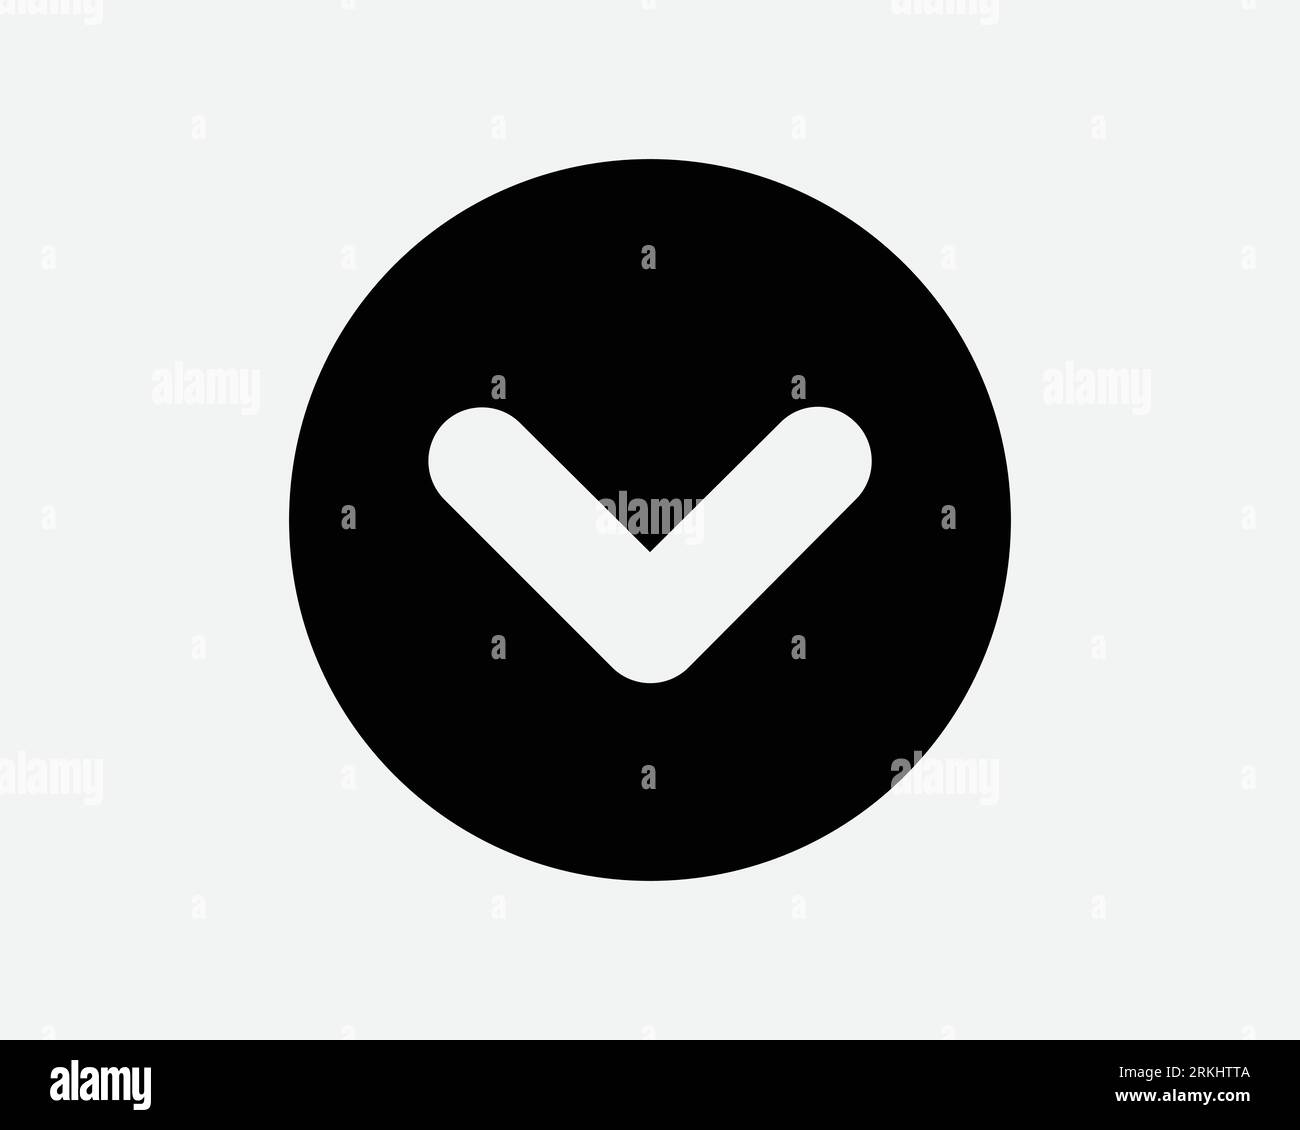 Round Down Arrow Icon Download Pointer Point Position Navigation Direction Path Circle Circular Button South Under Below Black White Vector Sign Symbo Stock Vektor